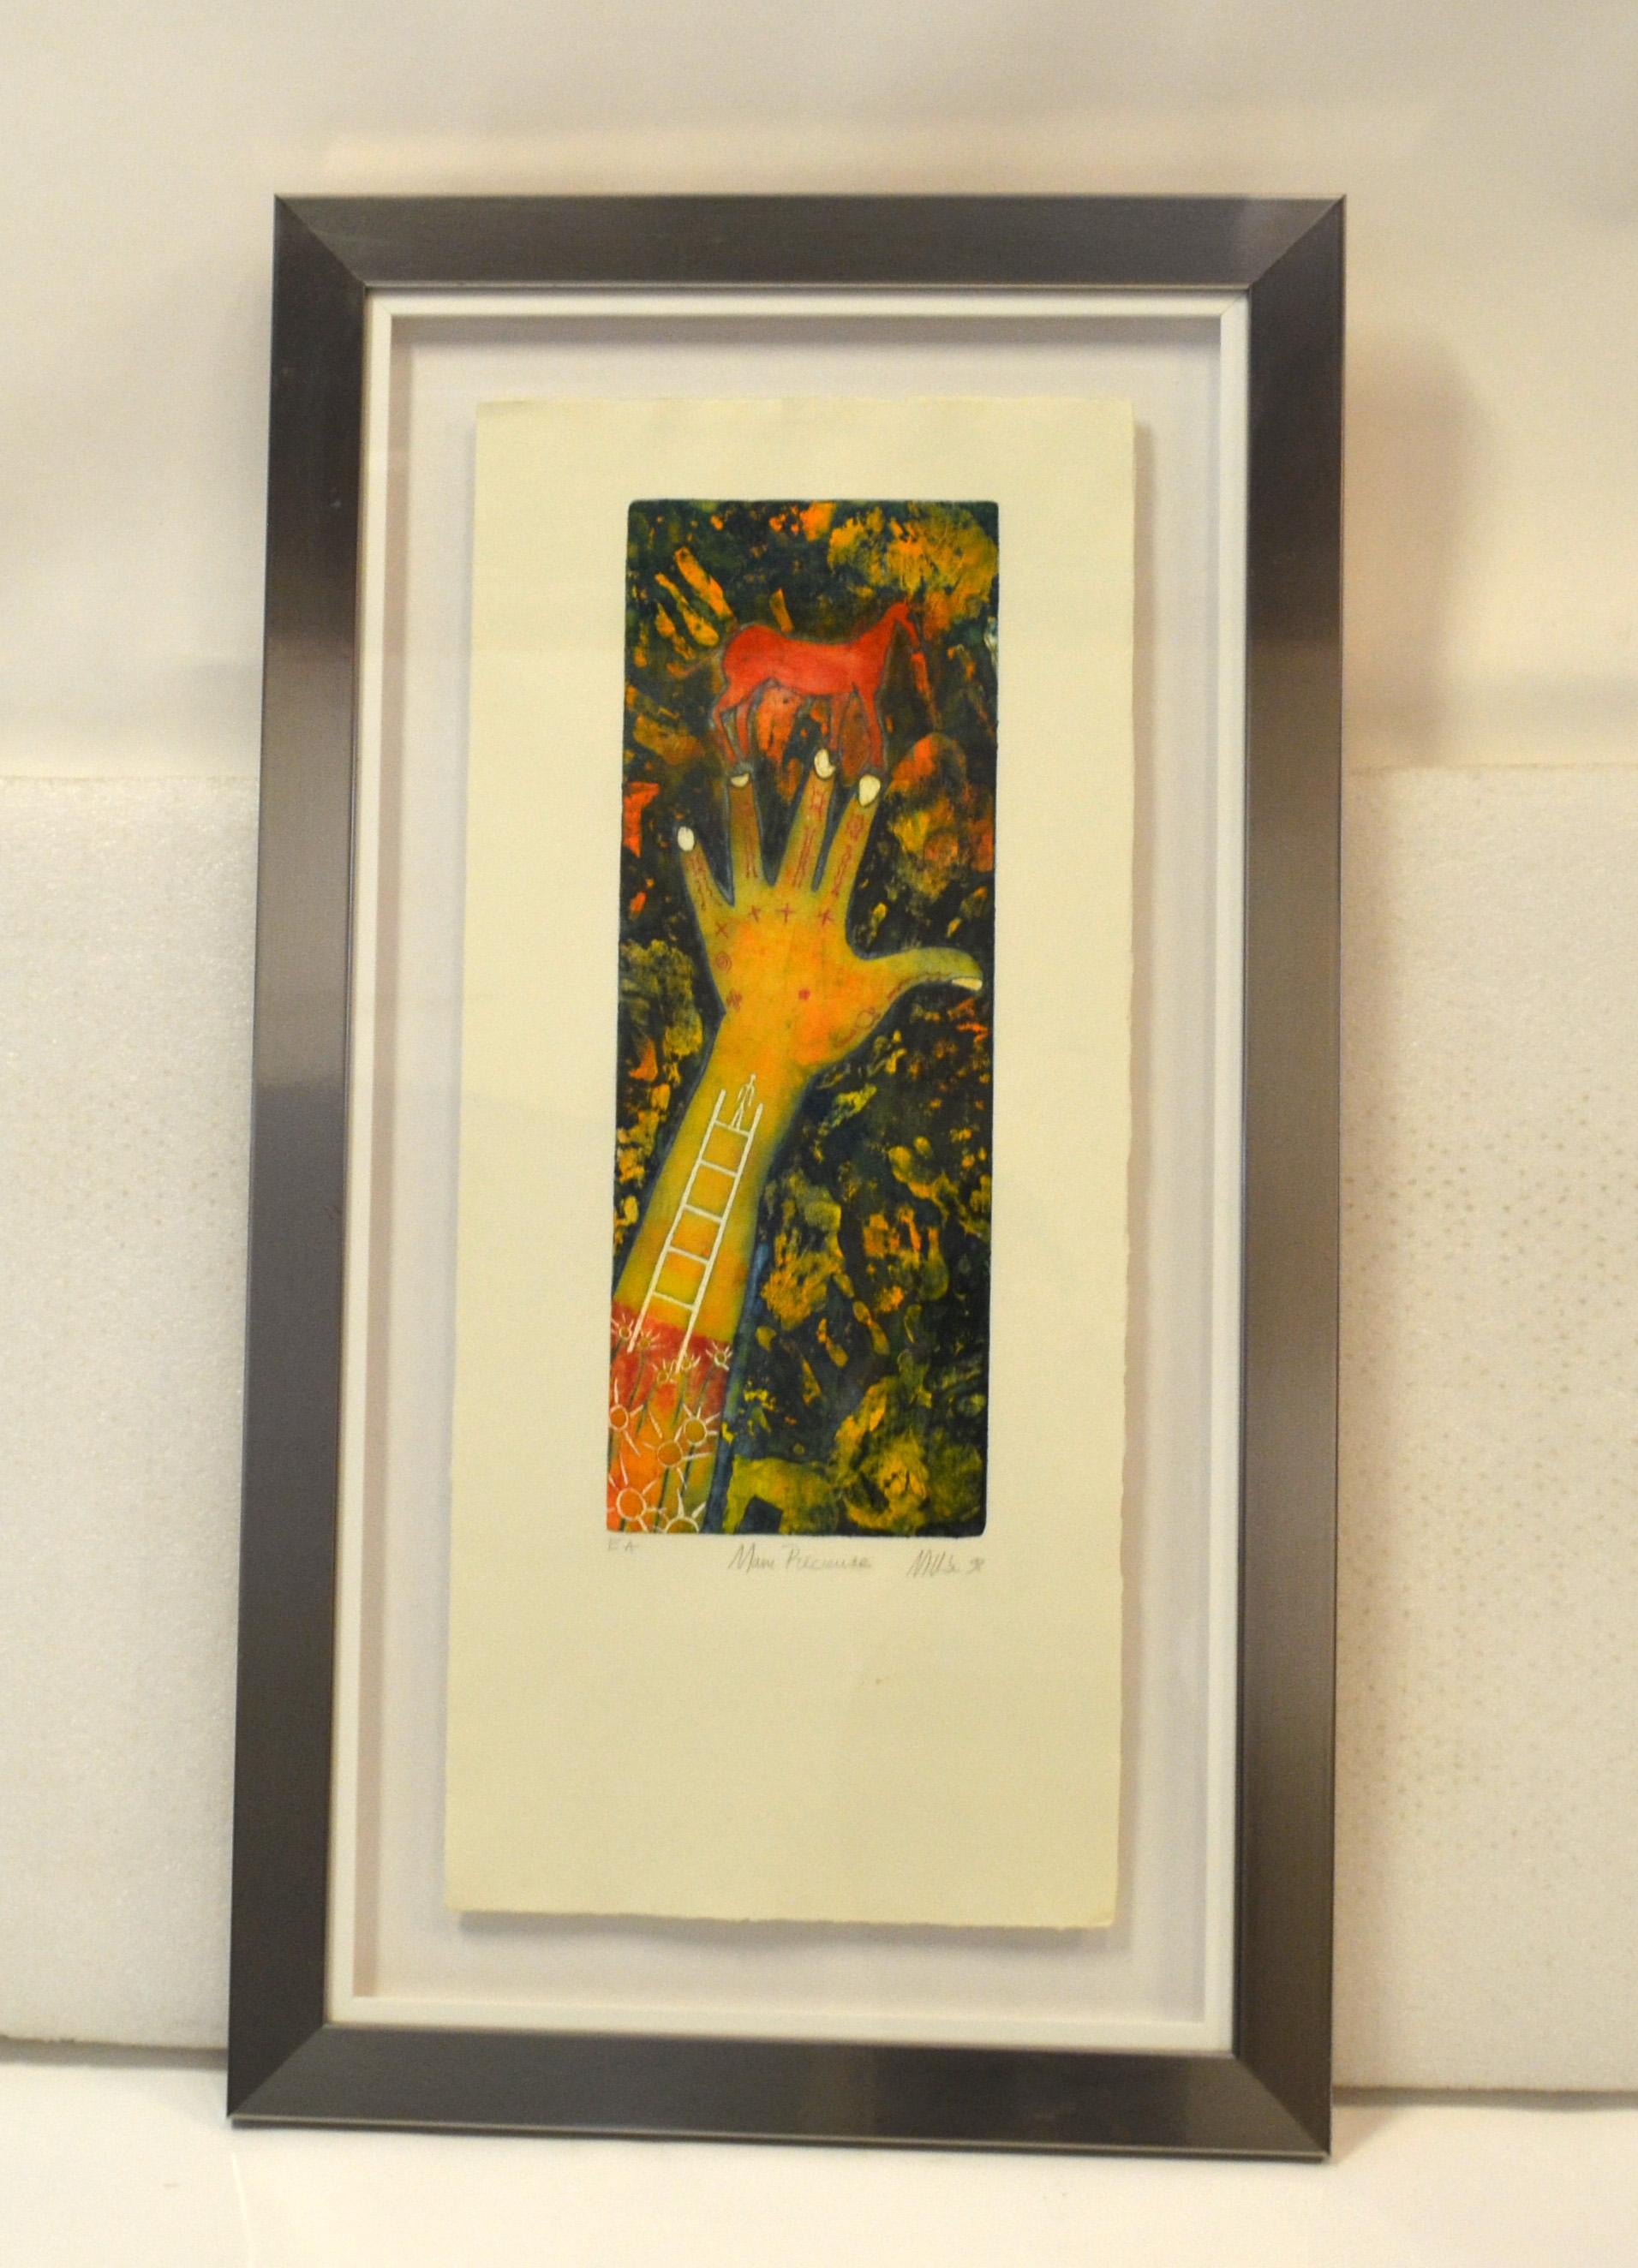 Hand-Painted Signed & Titled Main Précieuse Chrome Framed French Artist Lithography Etching  For Sale